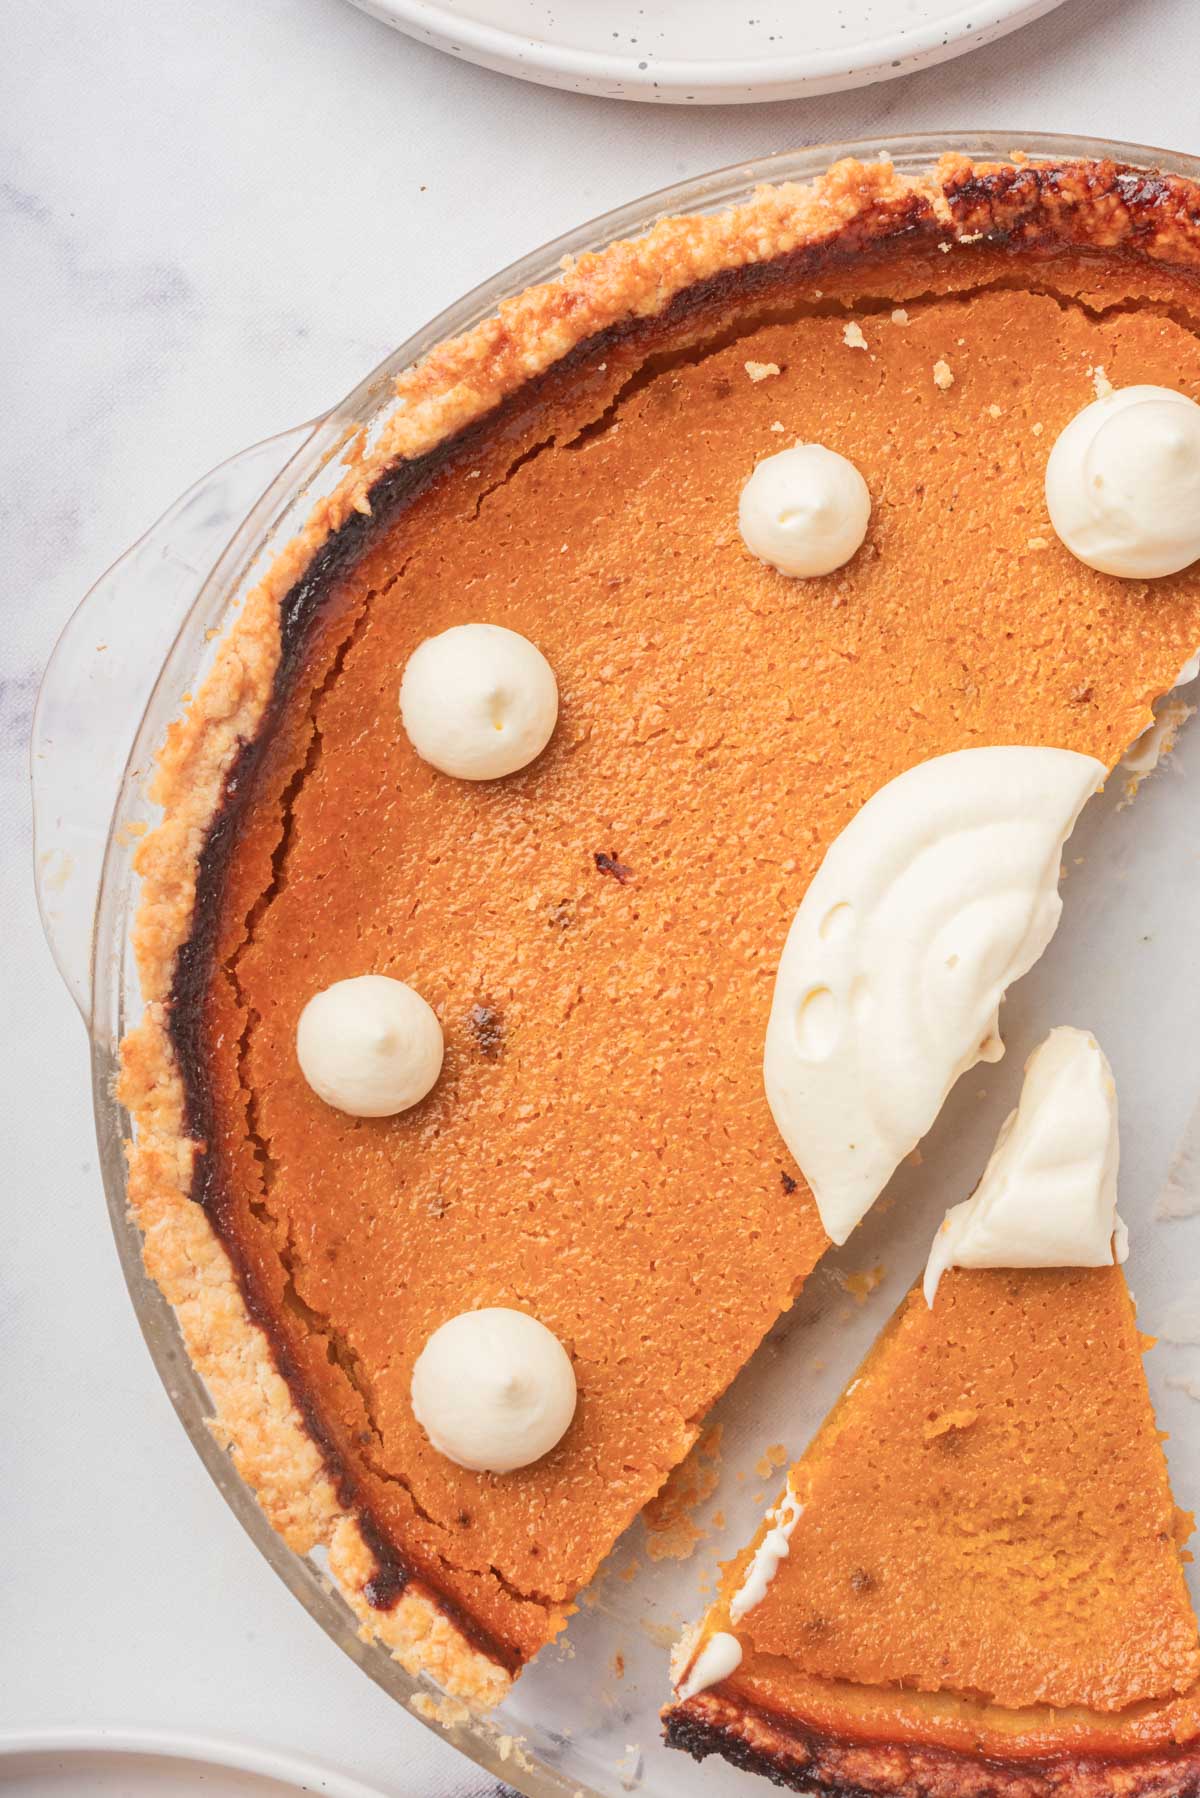 A close-up side view of the whole pumpkin pie with a golden-brown crust, highlighted by several dollops of whipped cream on top and a large swirl in the center.